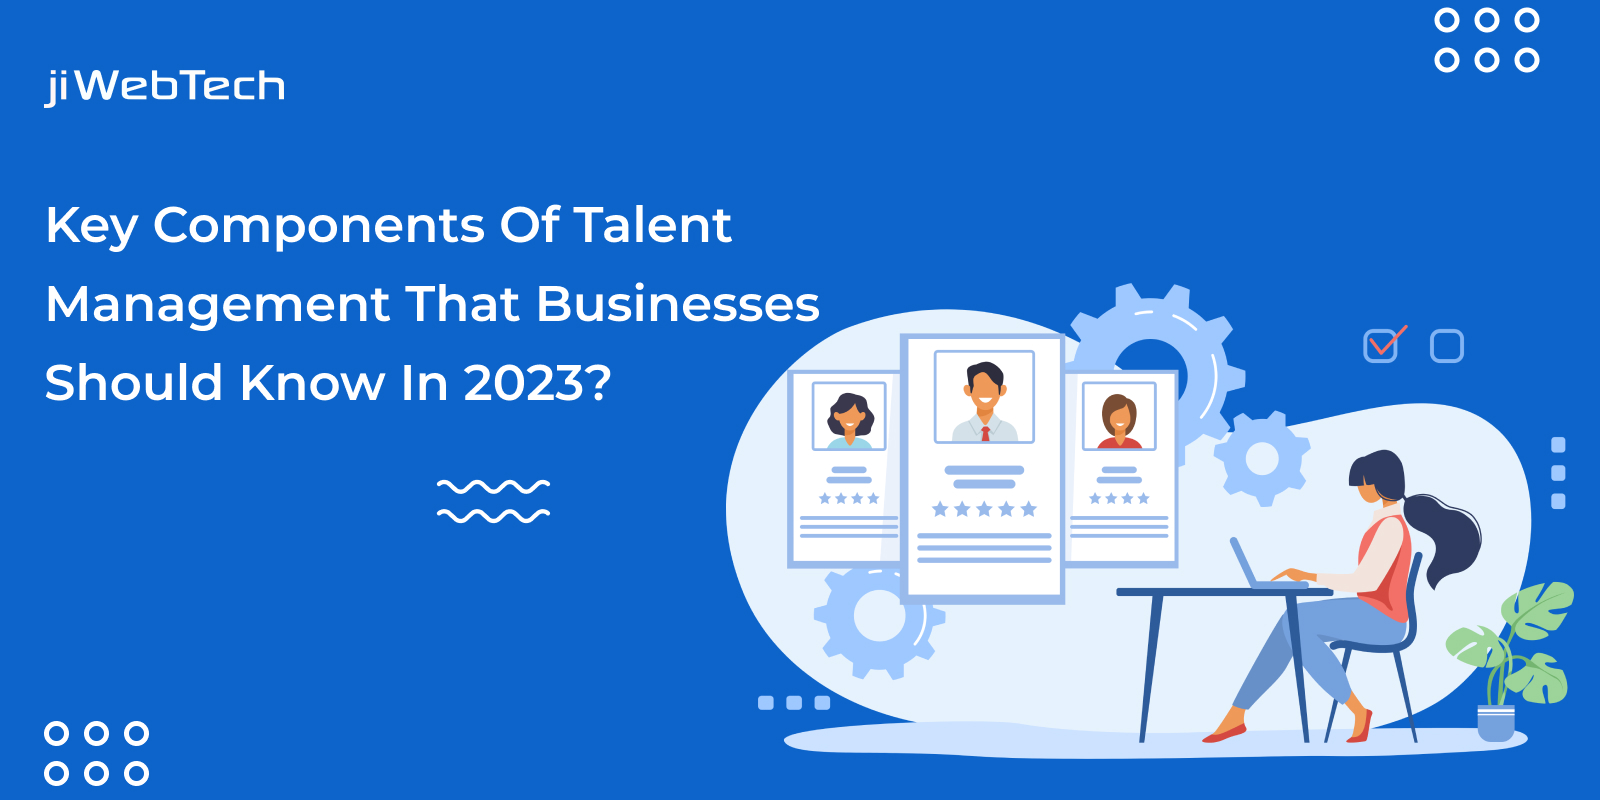 What Are The Key Components Of Talent Management That Businesses Should Know In 2023?